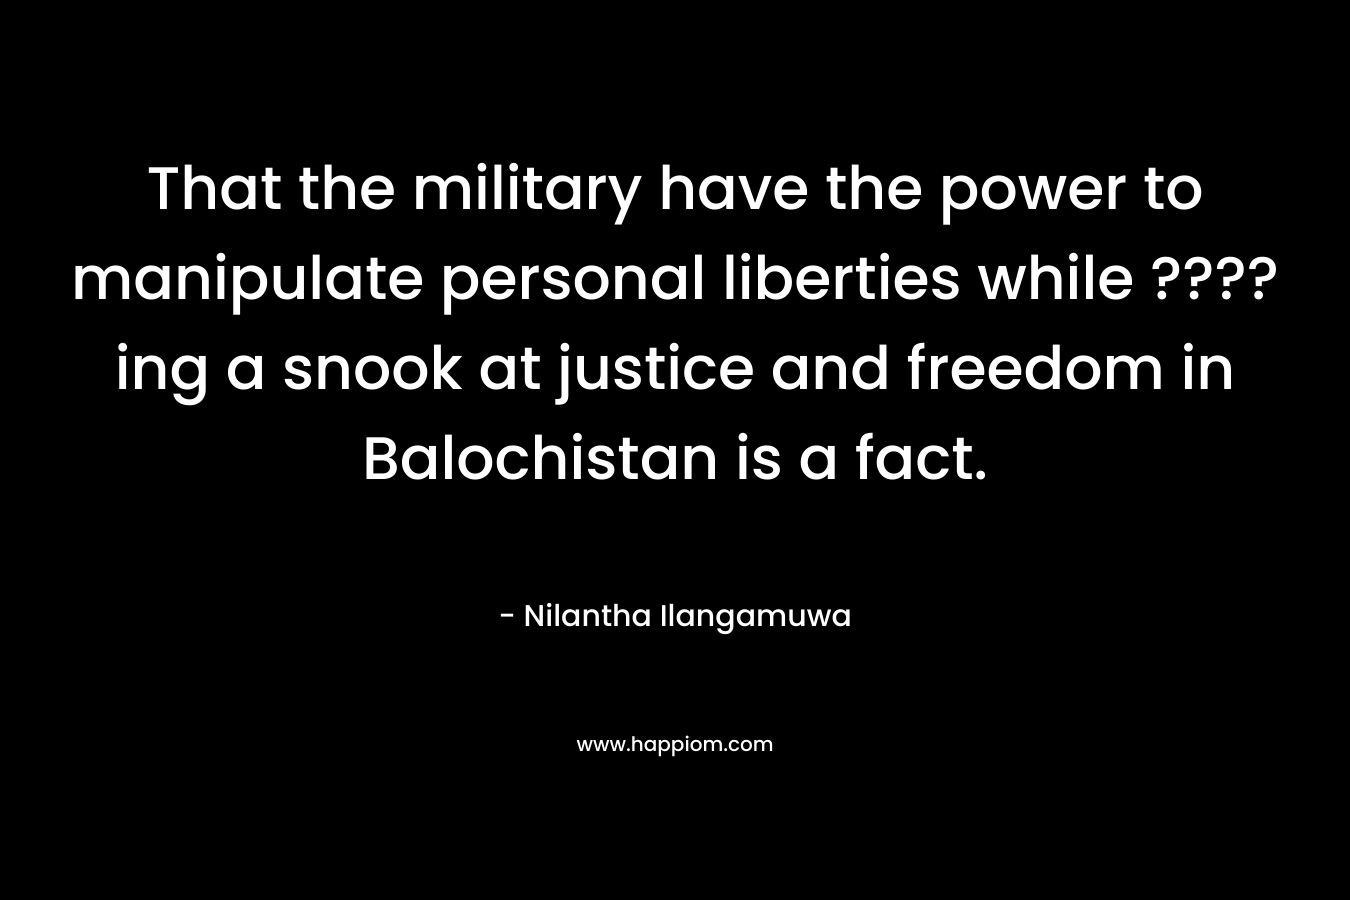 That the military have the power to manipulate personal liberties while ????ing a snook at justice and freedom in Balochistan is a fact.